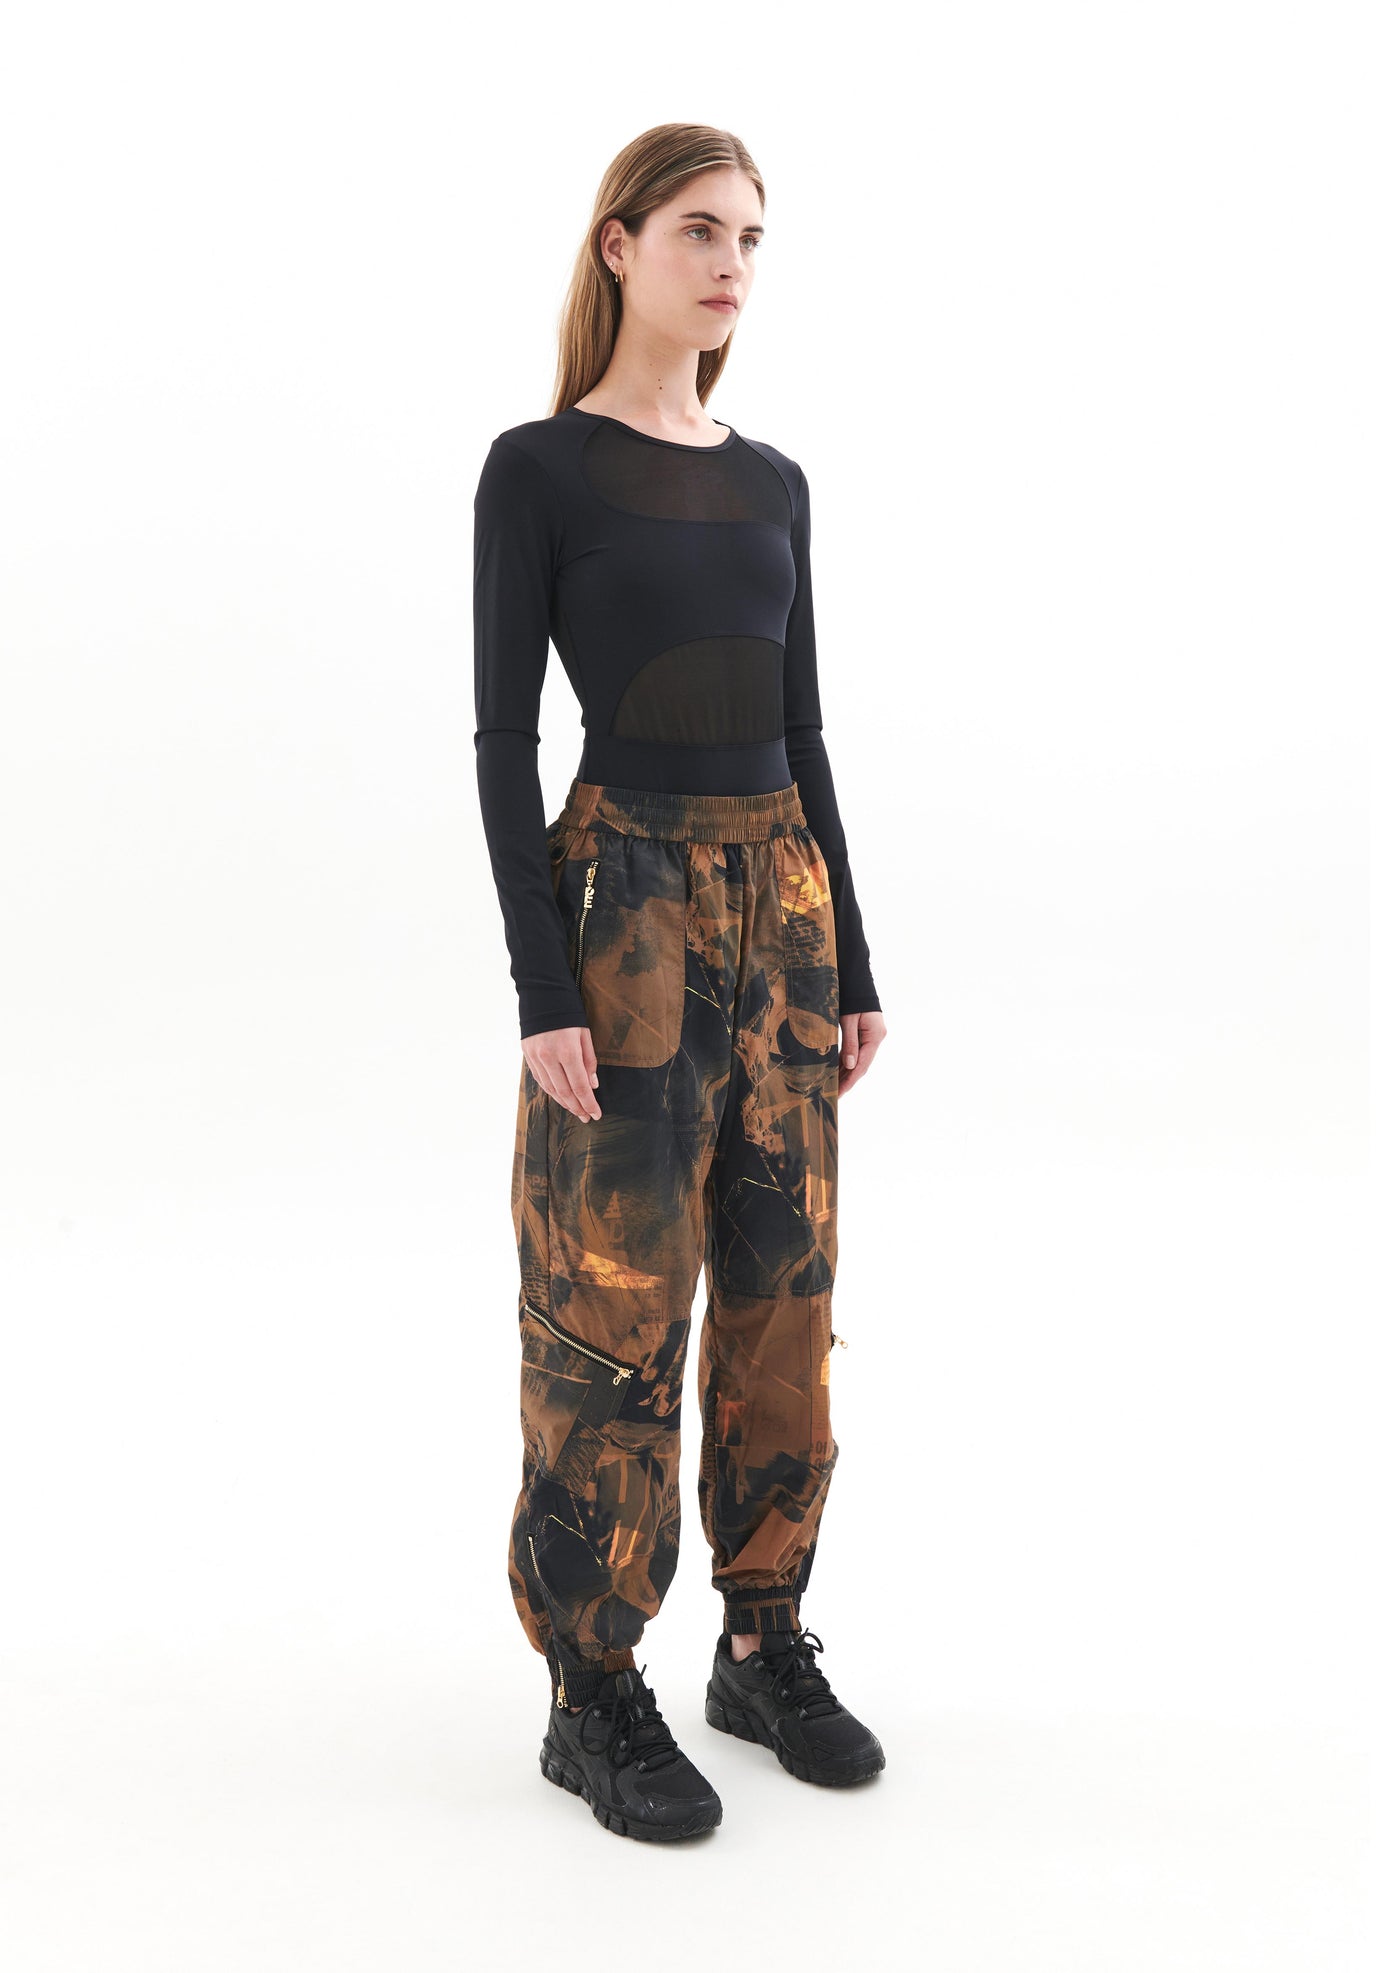 BLOCKHOUSE PANT IN COLLAGE PRINT